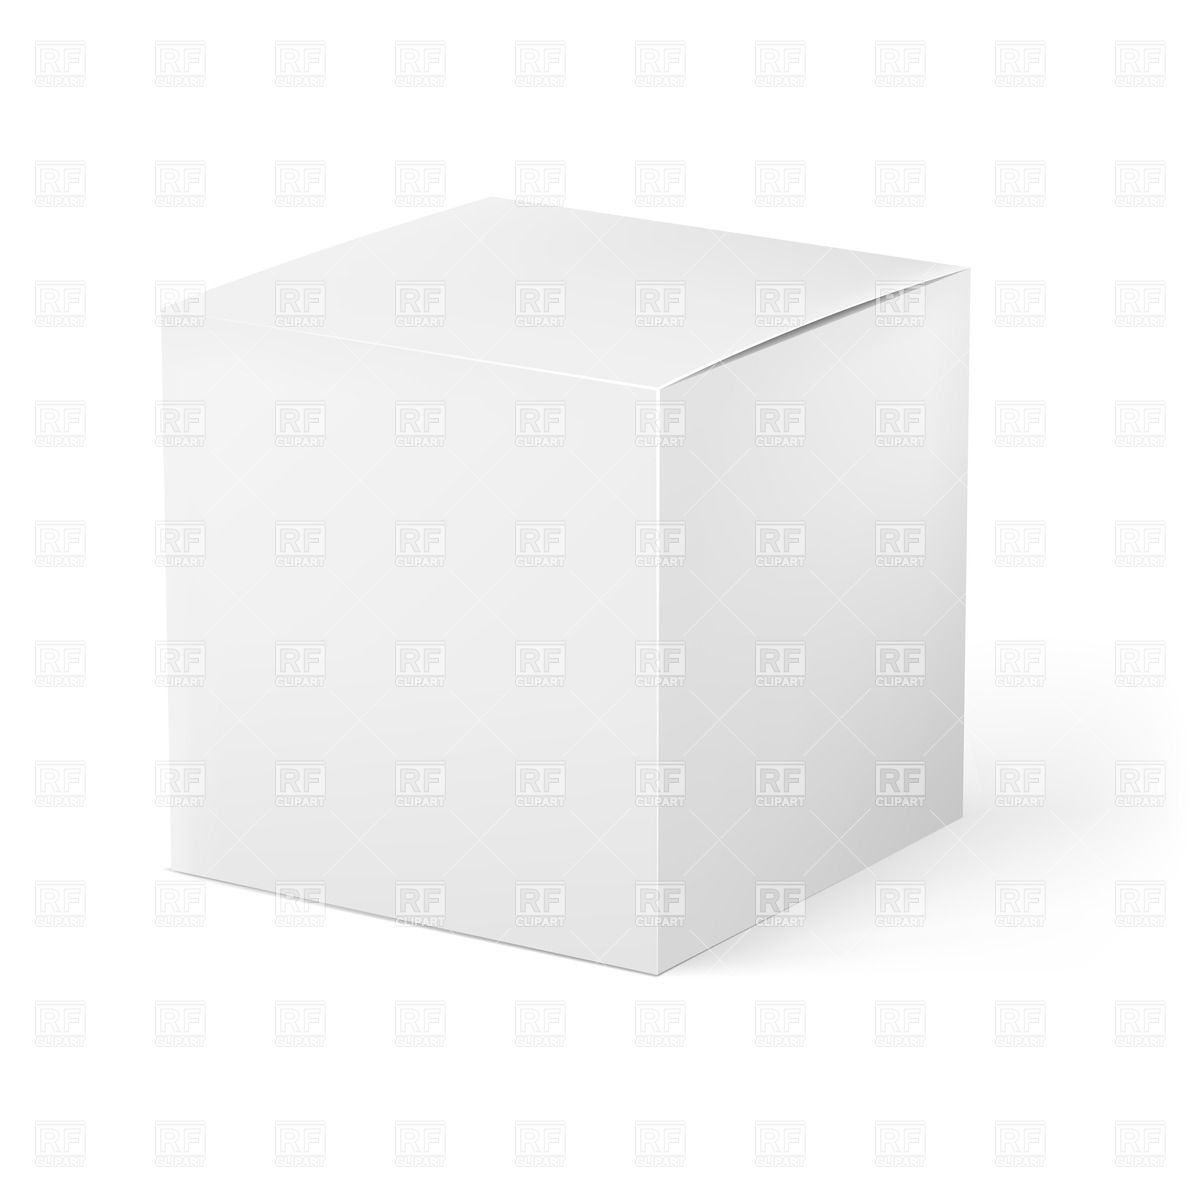 White Box   Blank Closed Cube 20506 Objects Download Royalty Free